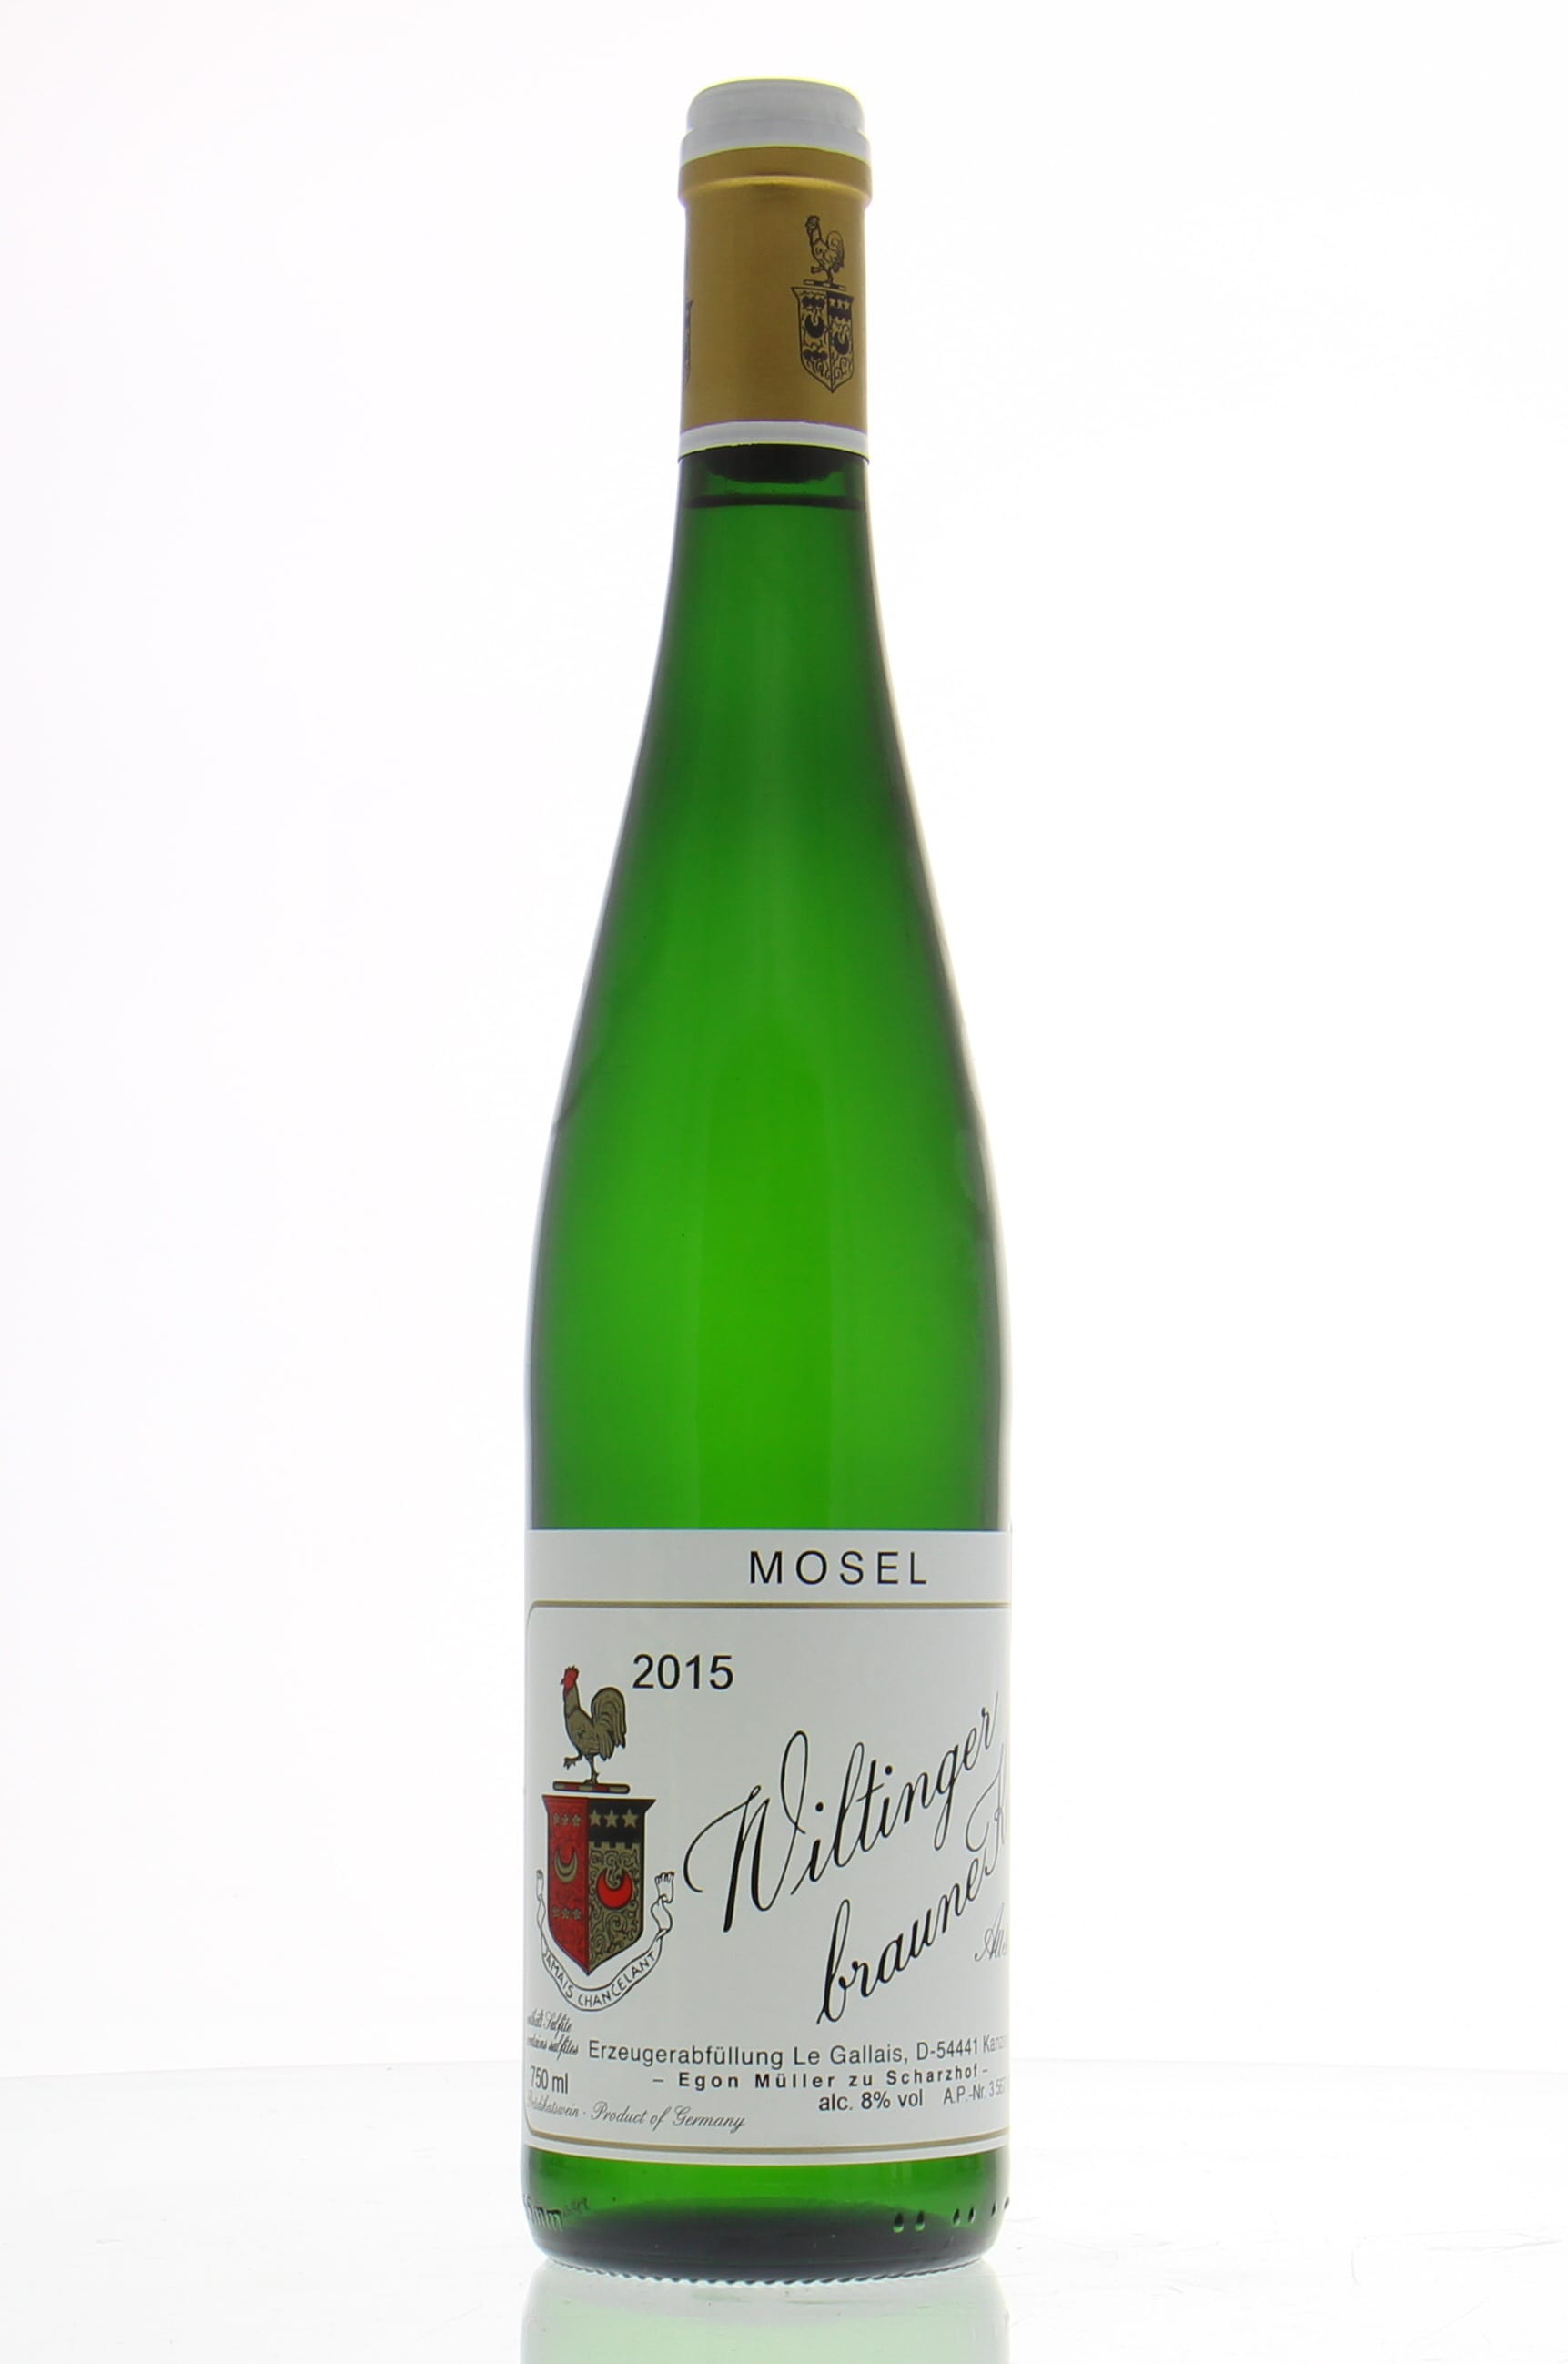 Egon Muller - Le Gallais Wiltinger Braune Kupp Riesling Auslese 2015 Perfect